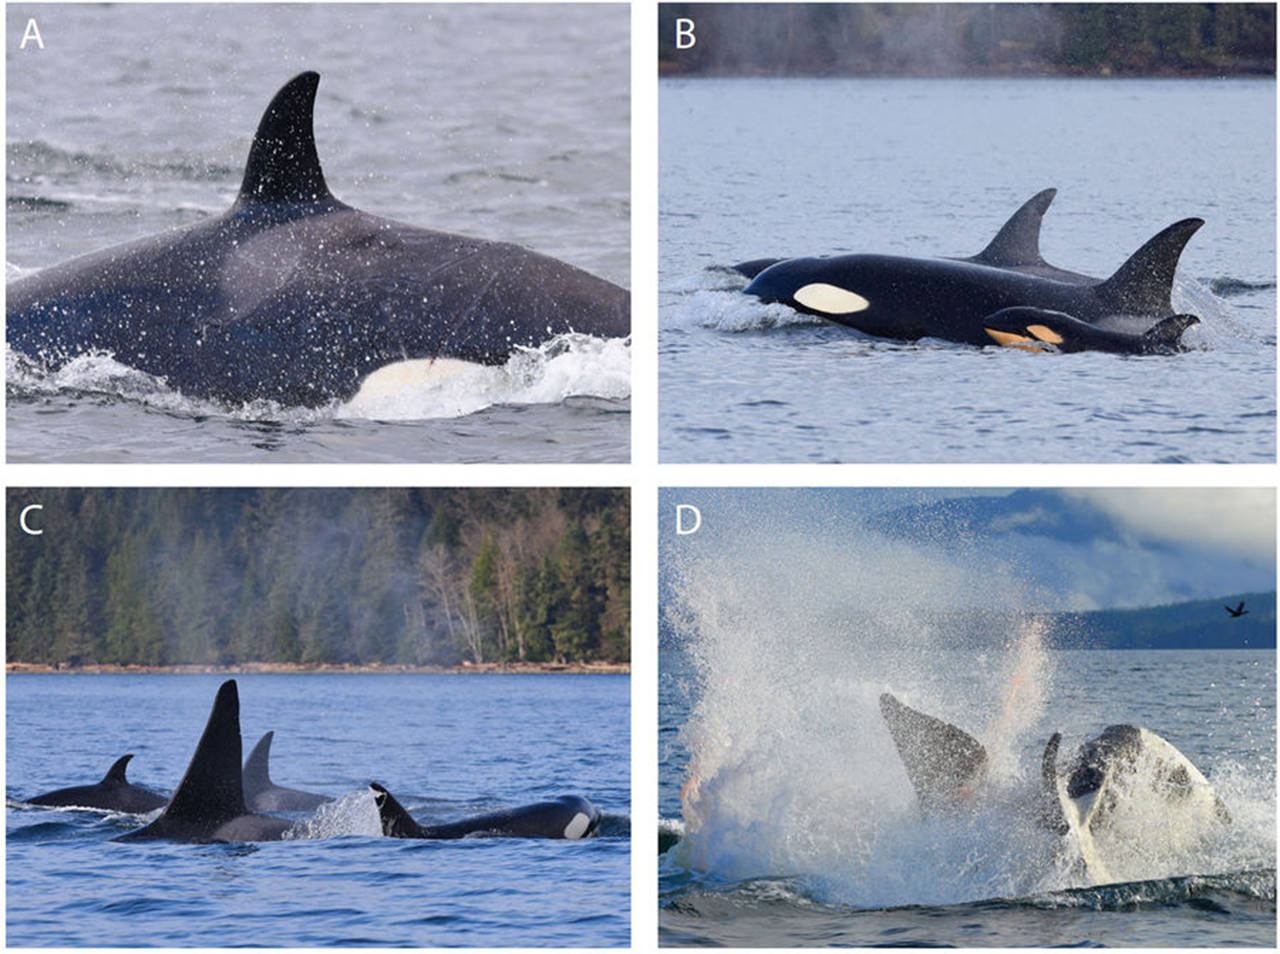 Scientists document rare orca infanticide in Canadian waters